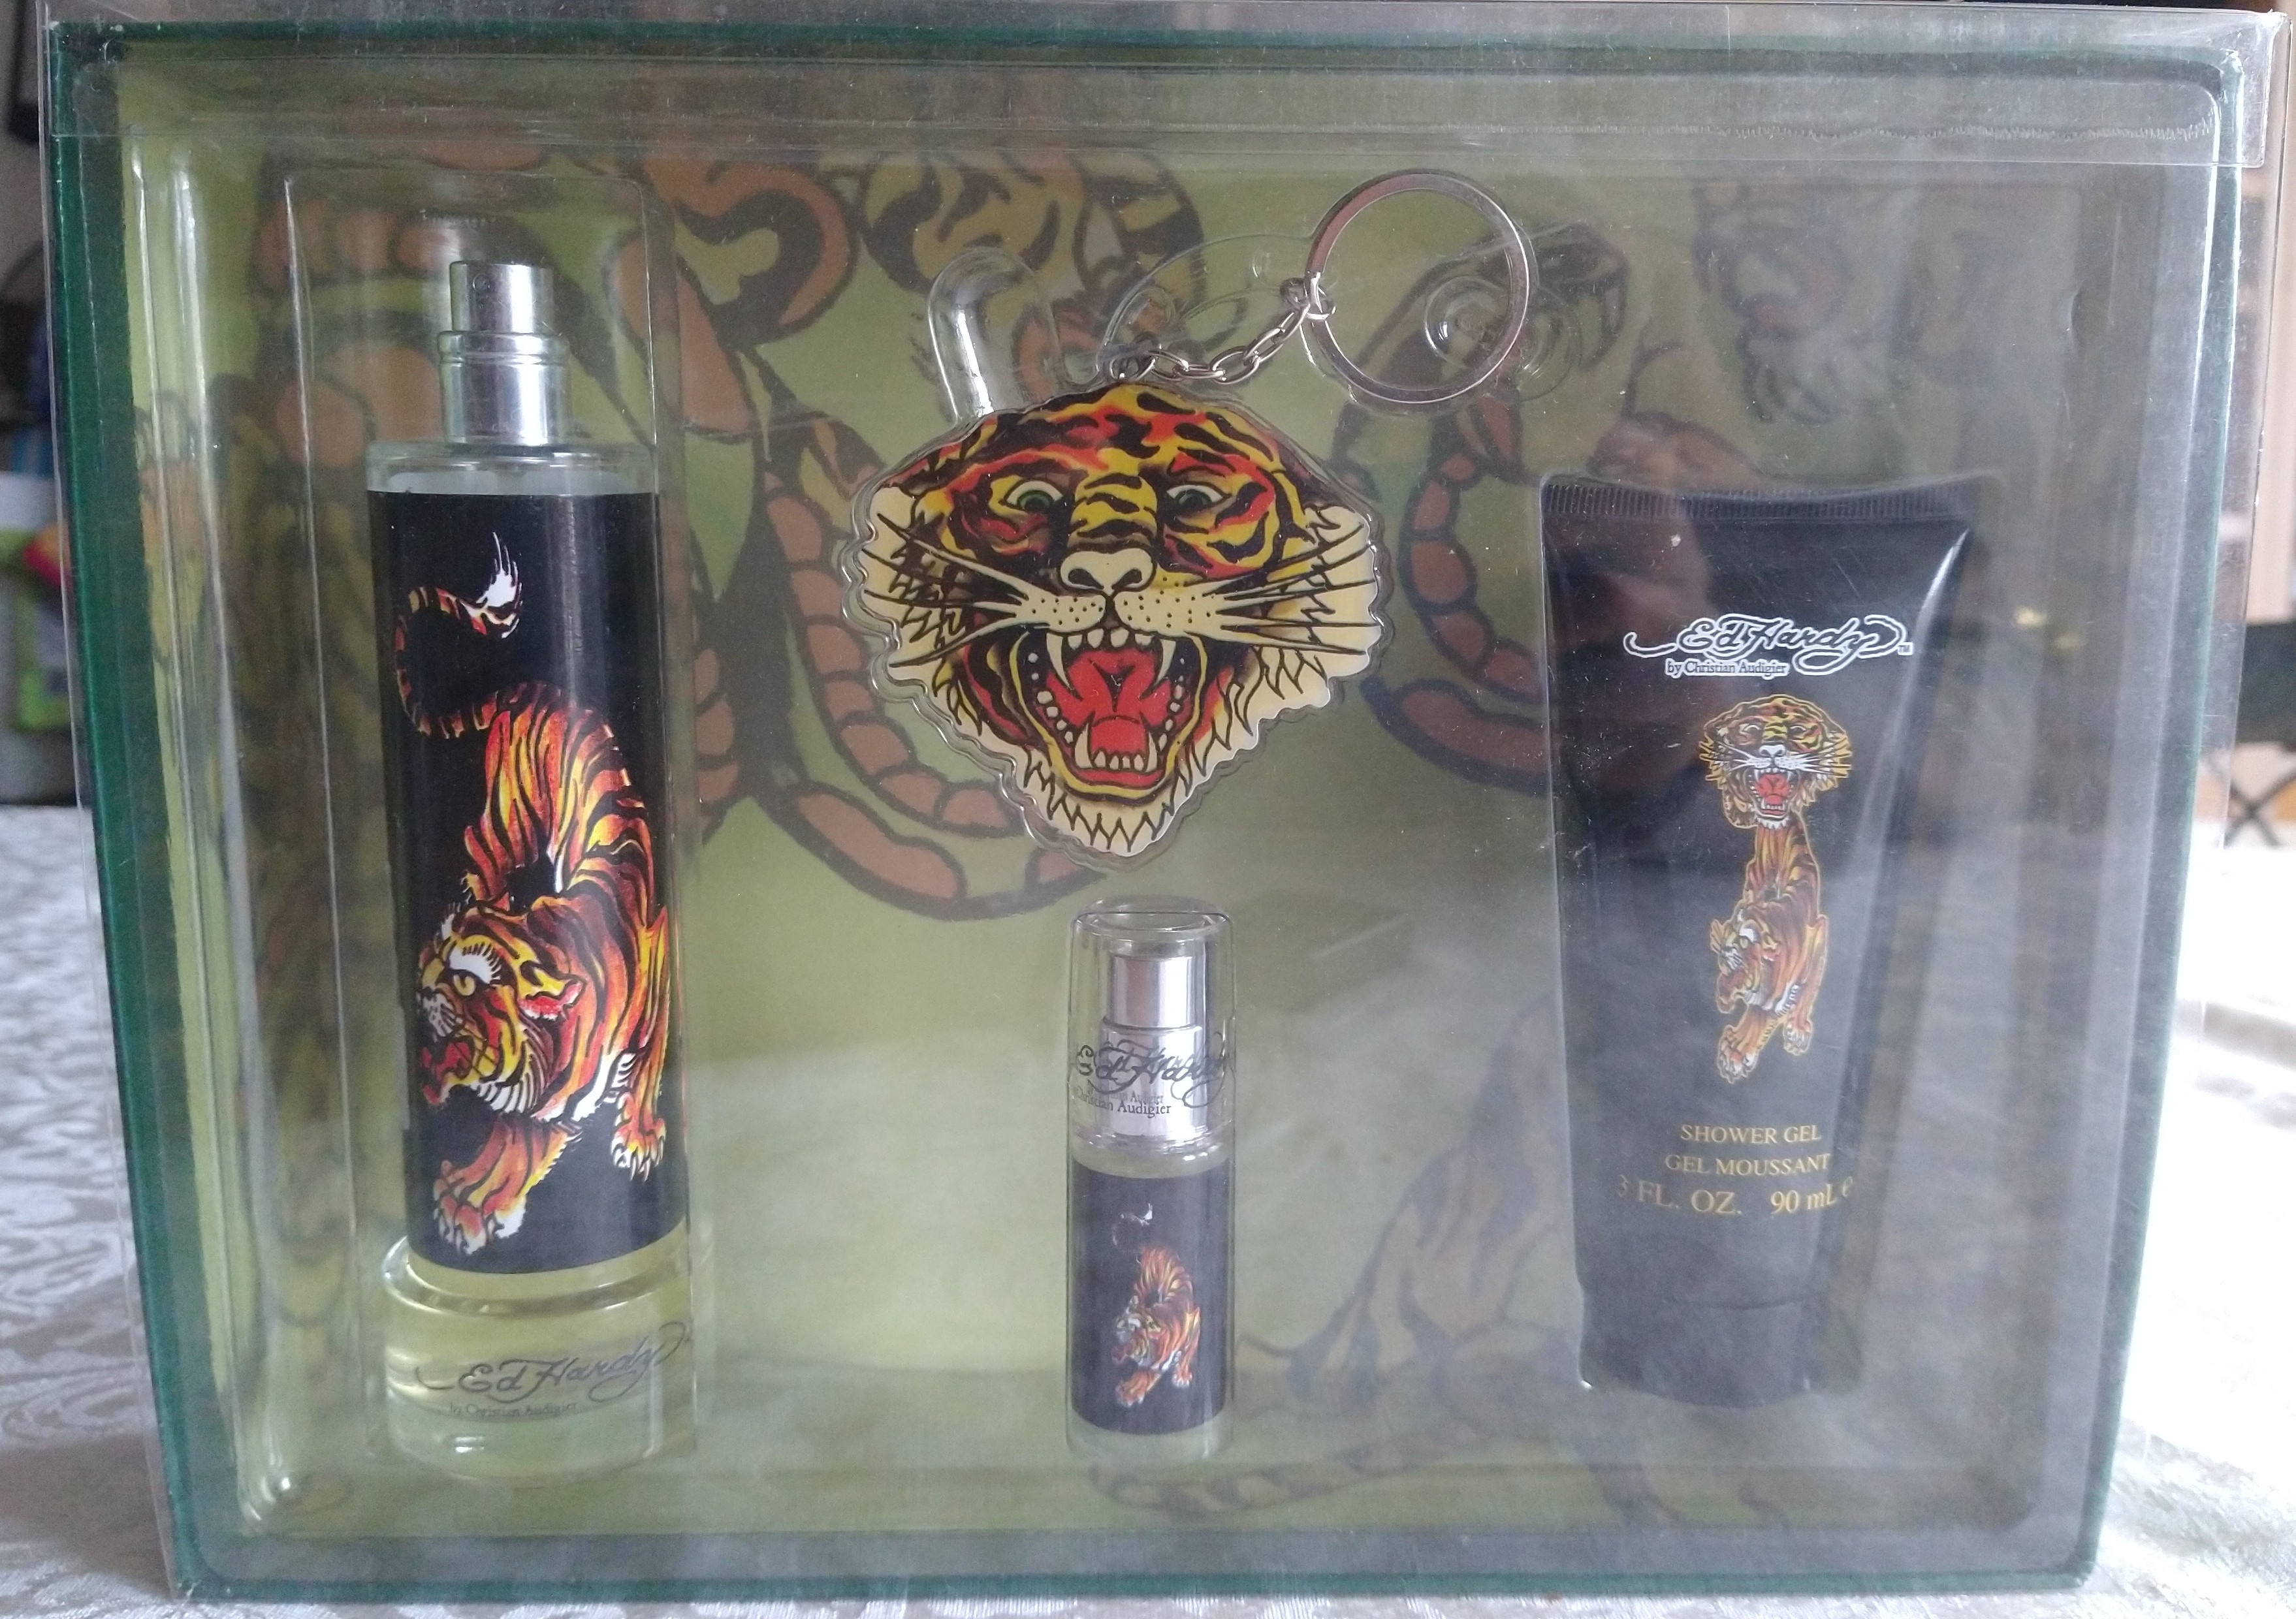 OUT OF STOCK Ed Hardy by Christian Audigier Gift Set